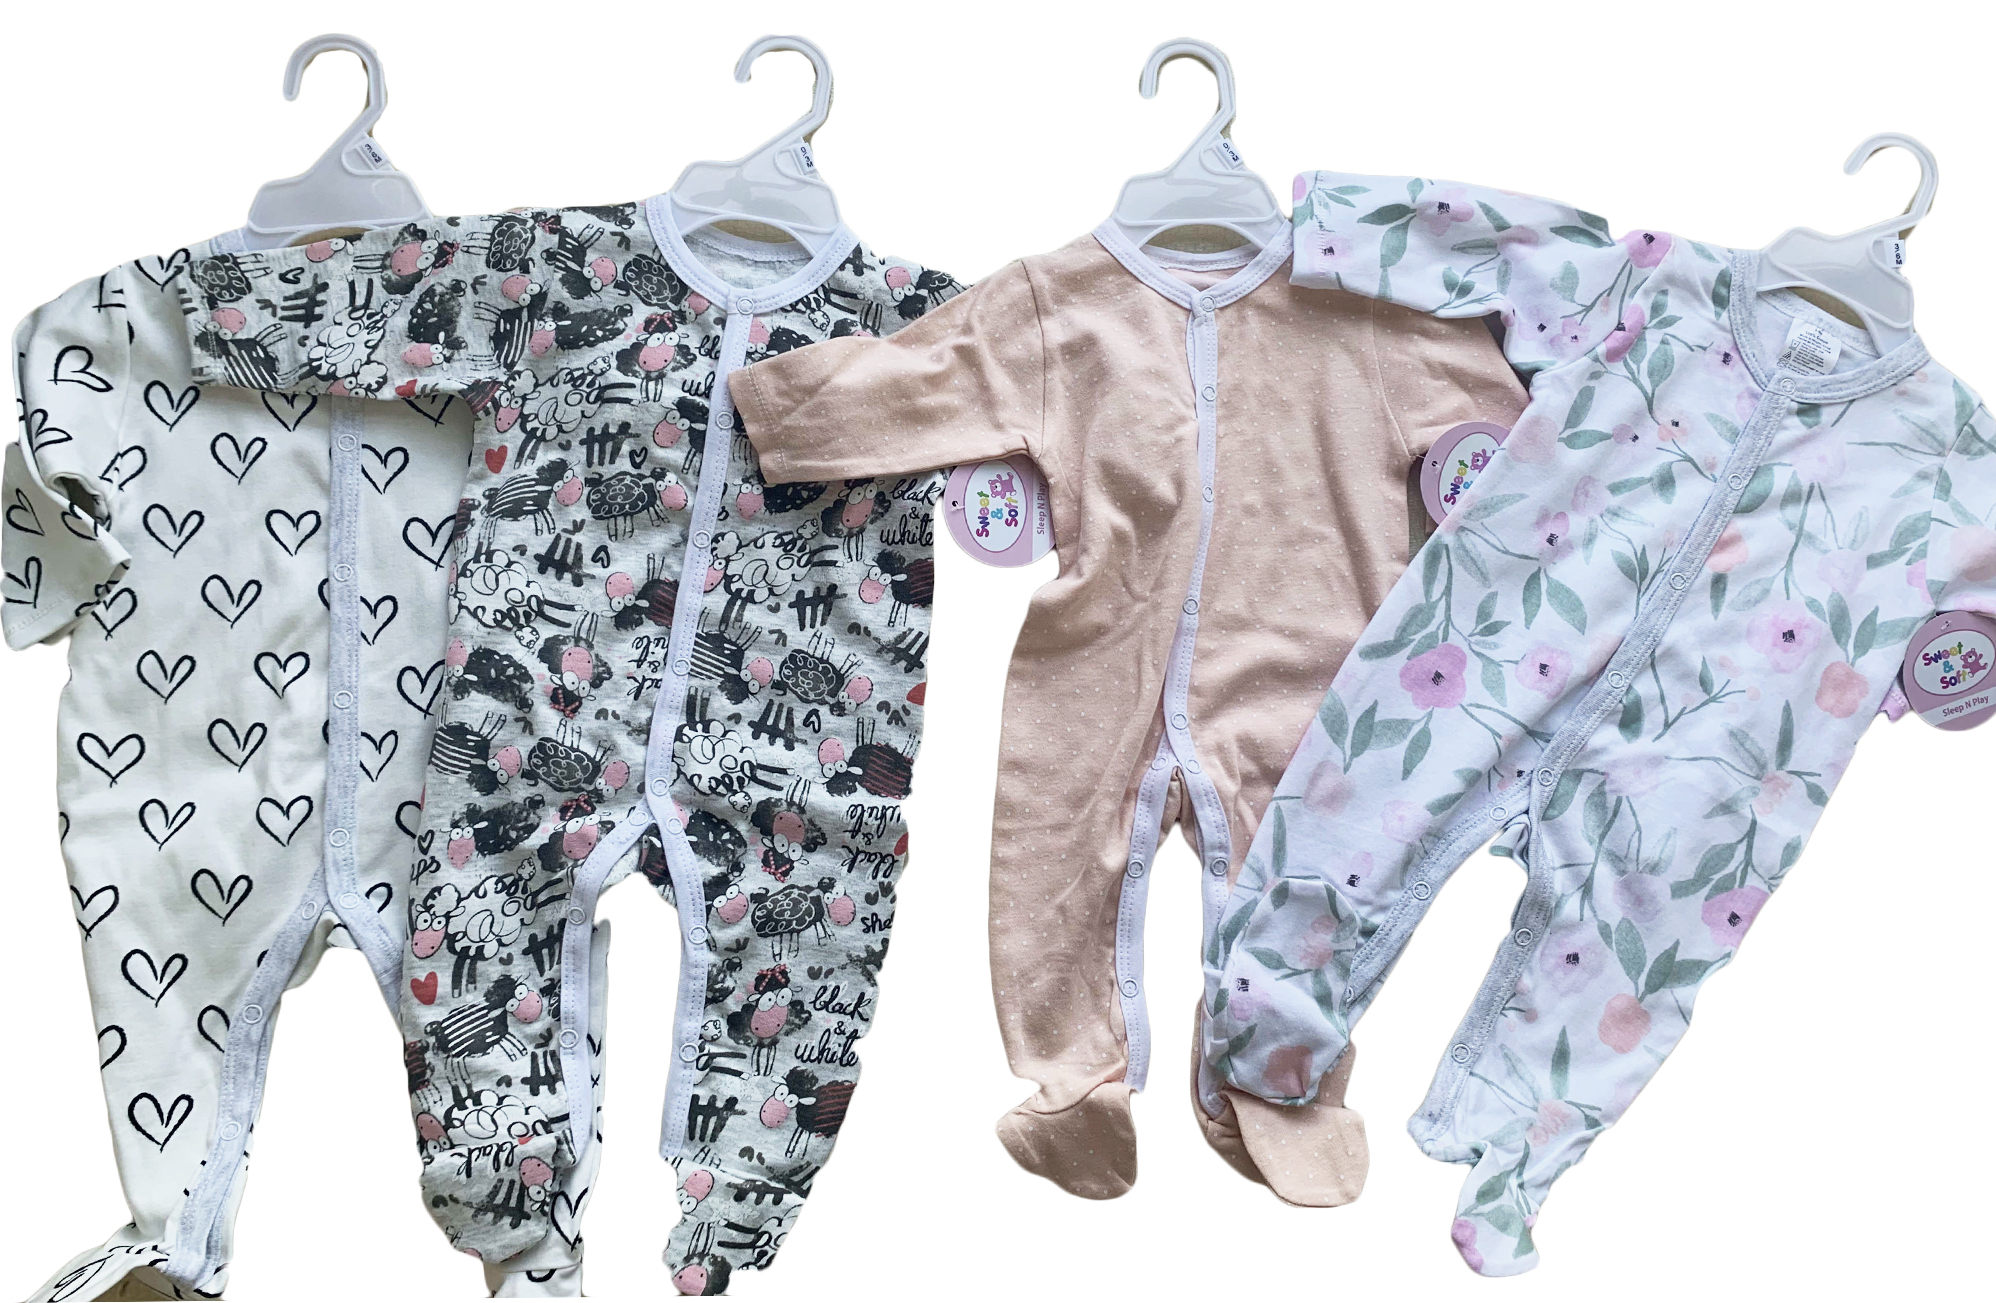 ''Baby Girl's Printed Knit One-Piece Footed PAJAMAS w/ Heart, Polka Dot, & Floral Print''